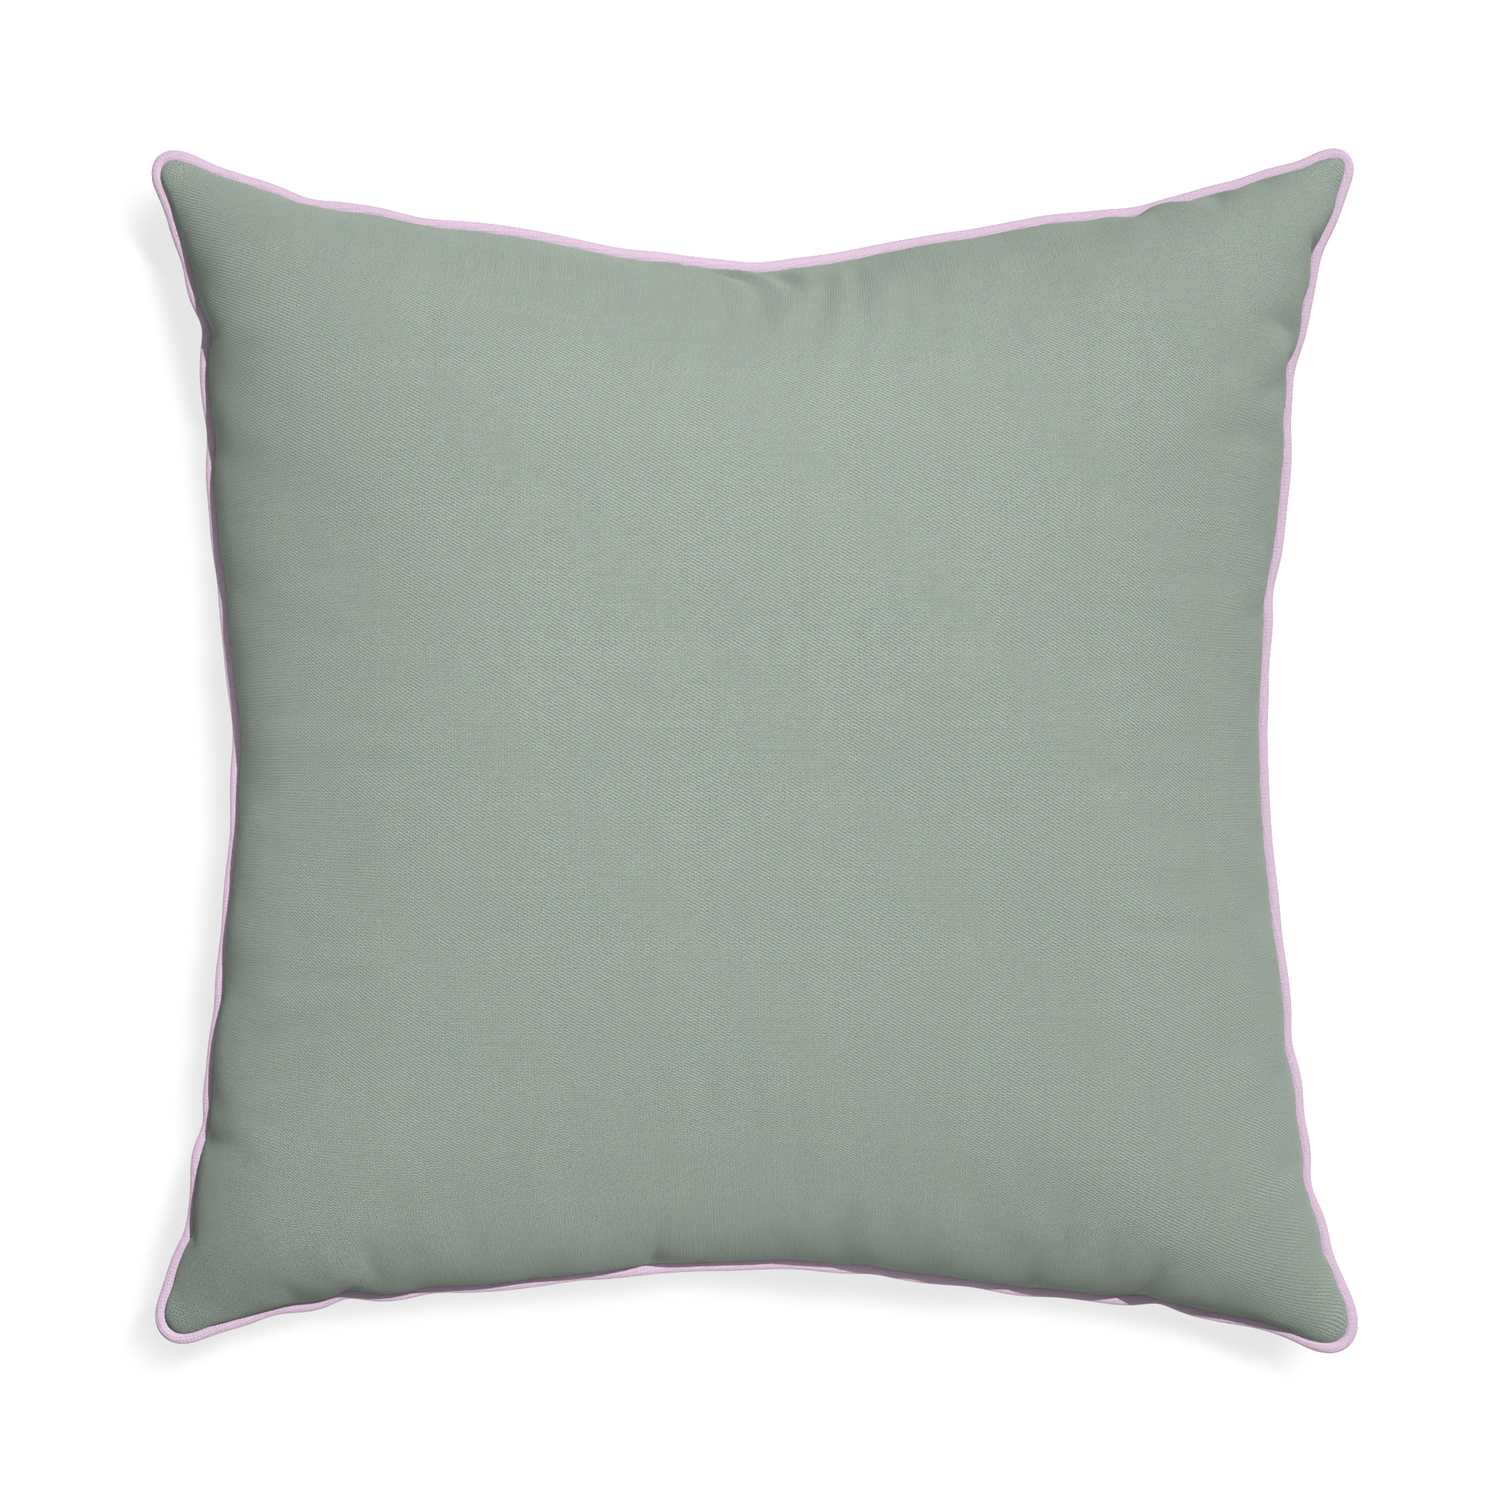 Euro-sham sage custom sage green cottonpillow with l piping on white background